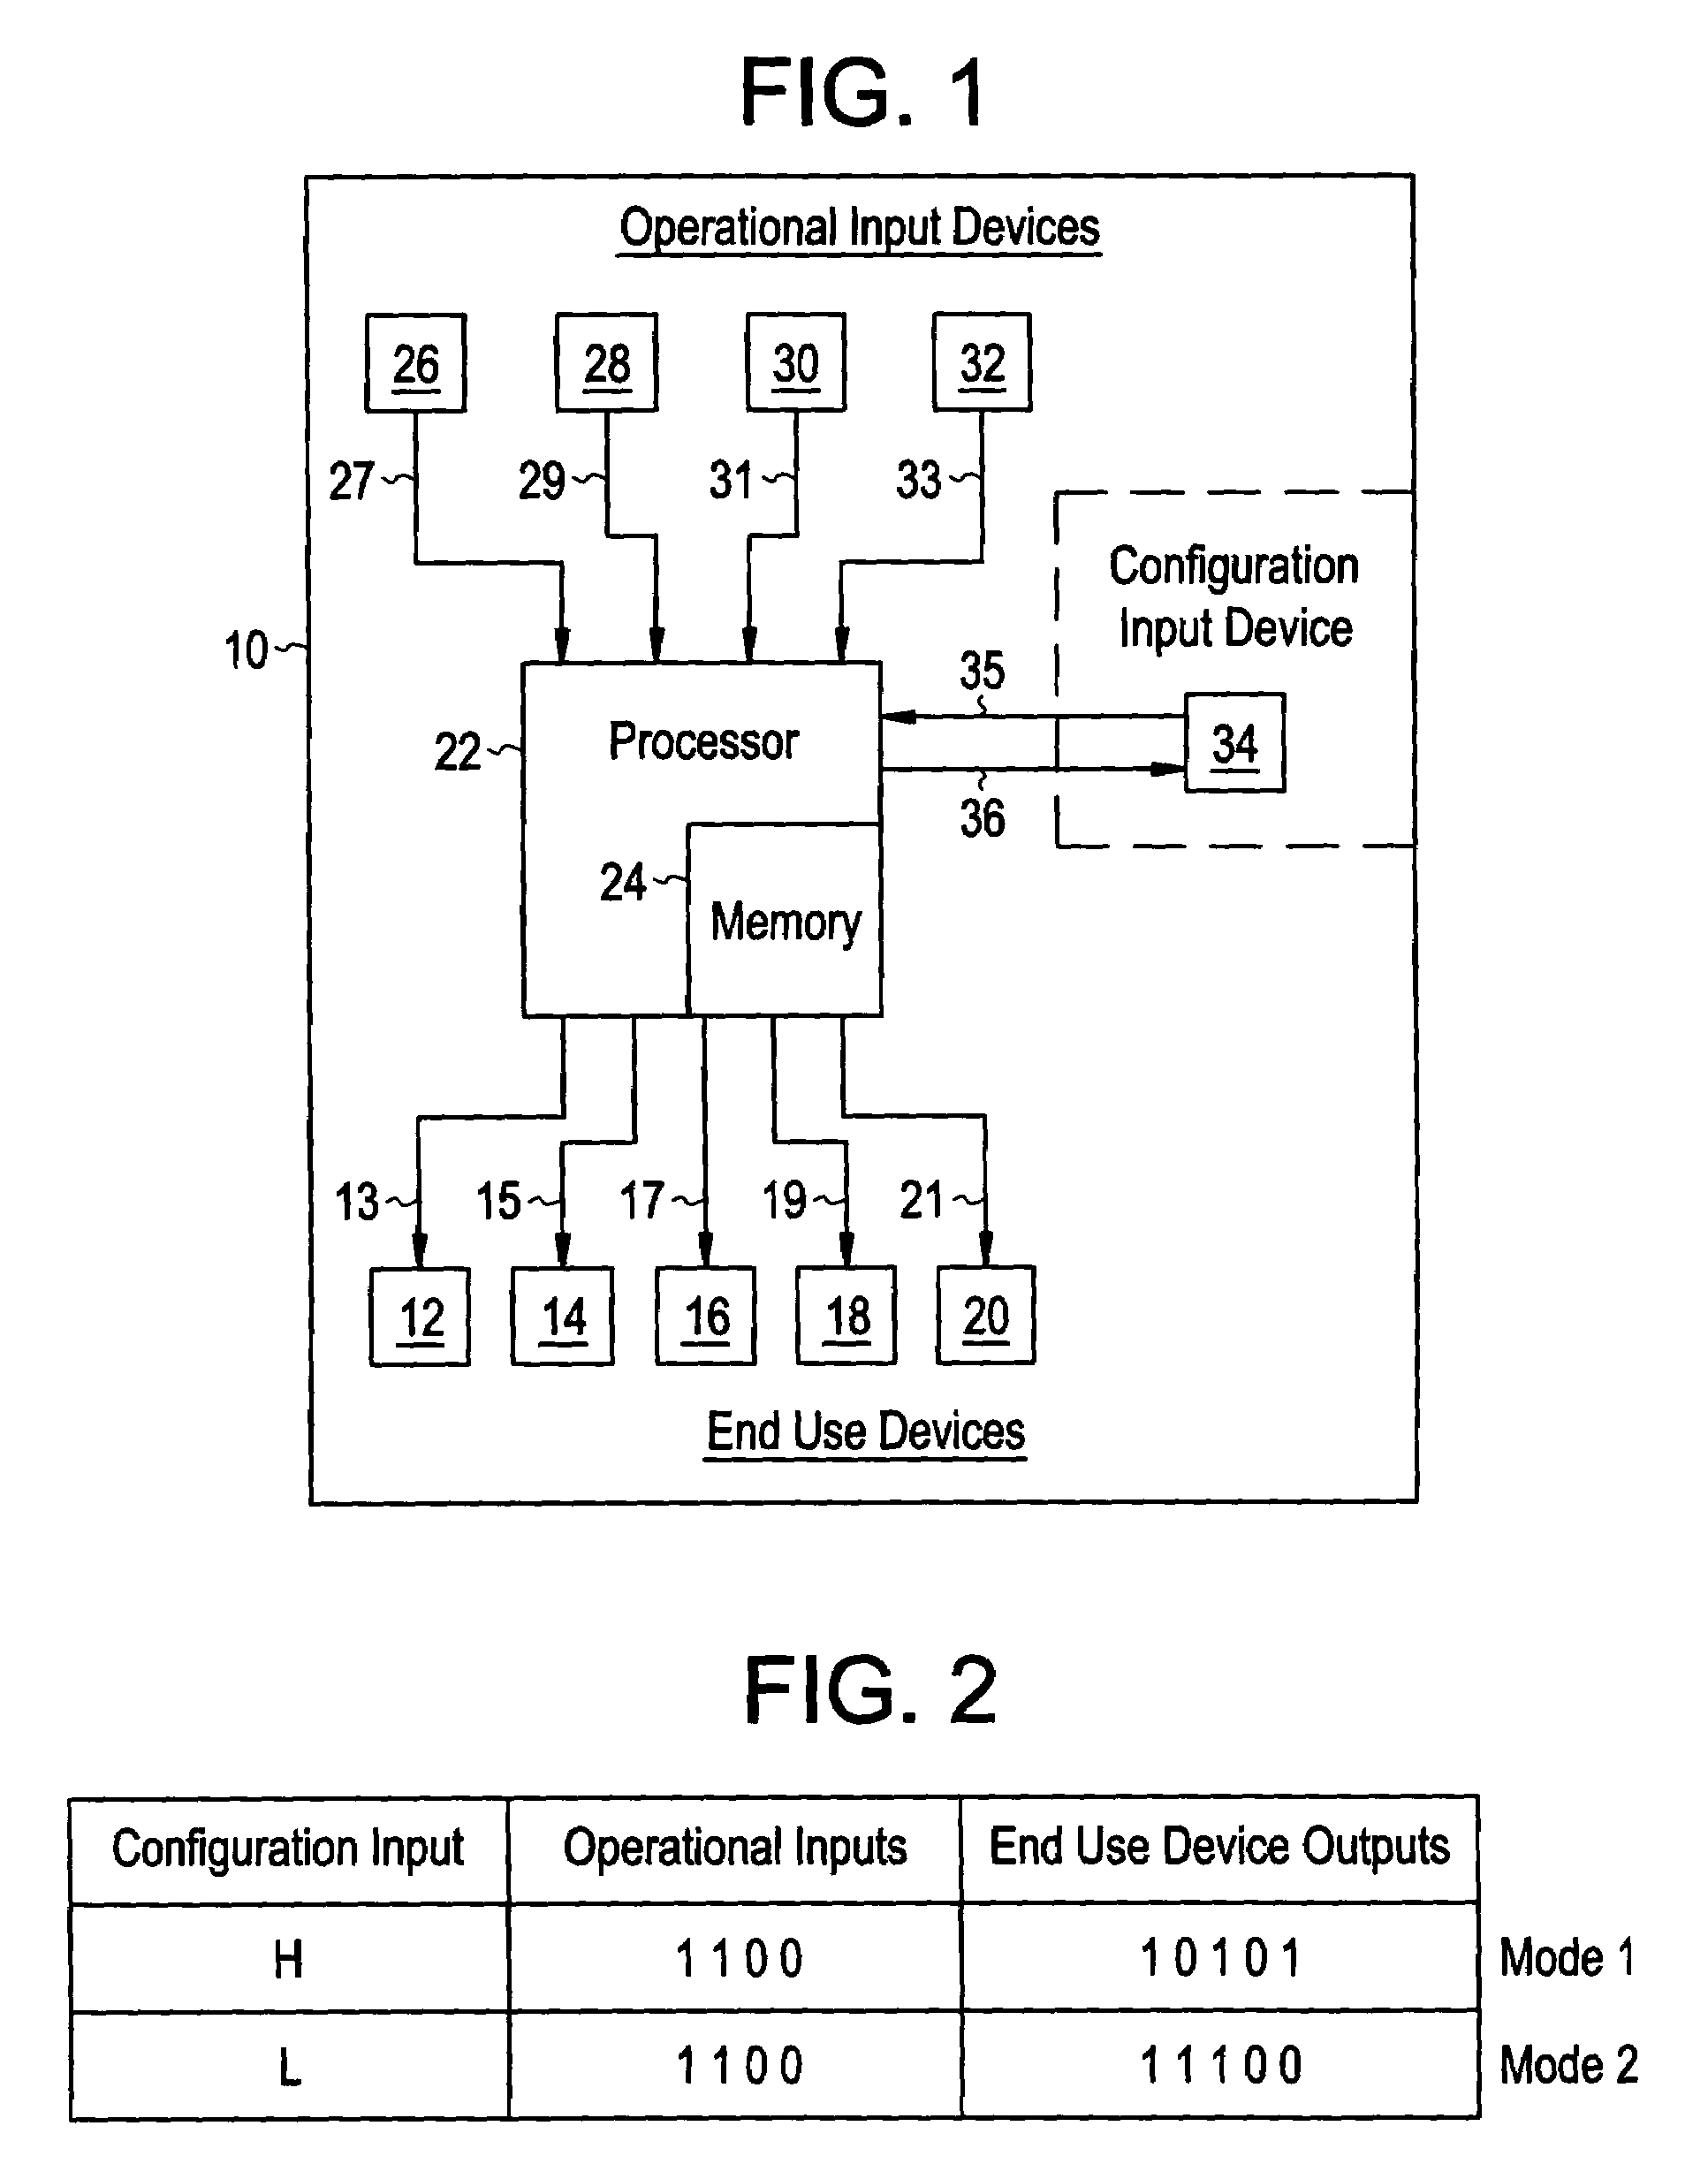 System and method for managing emissions from mobile vehicles